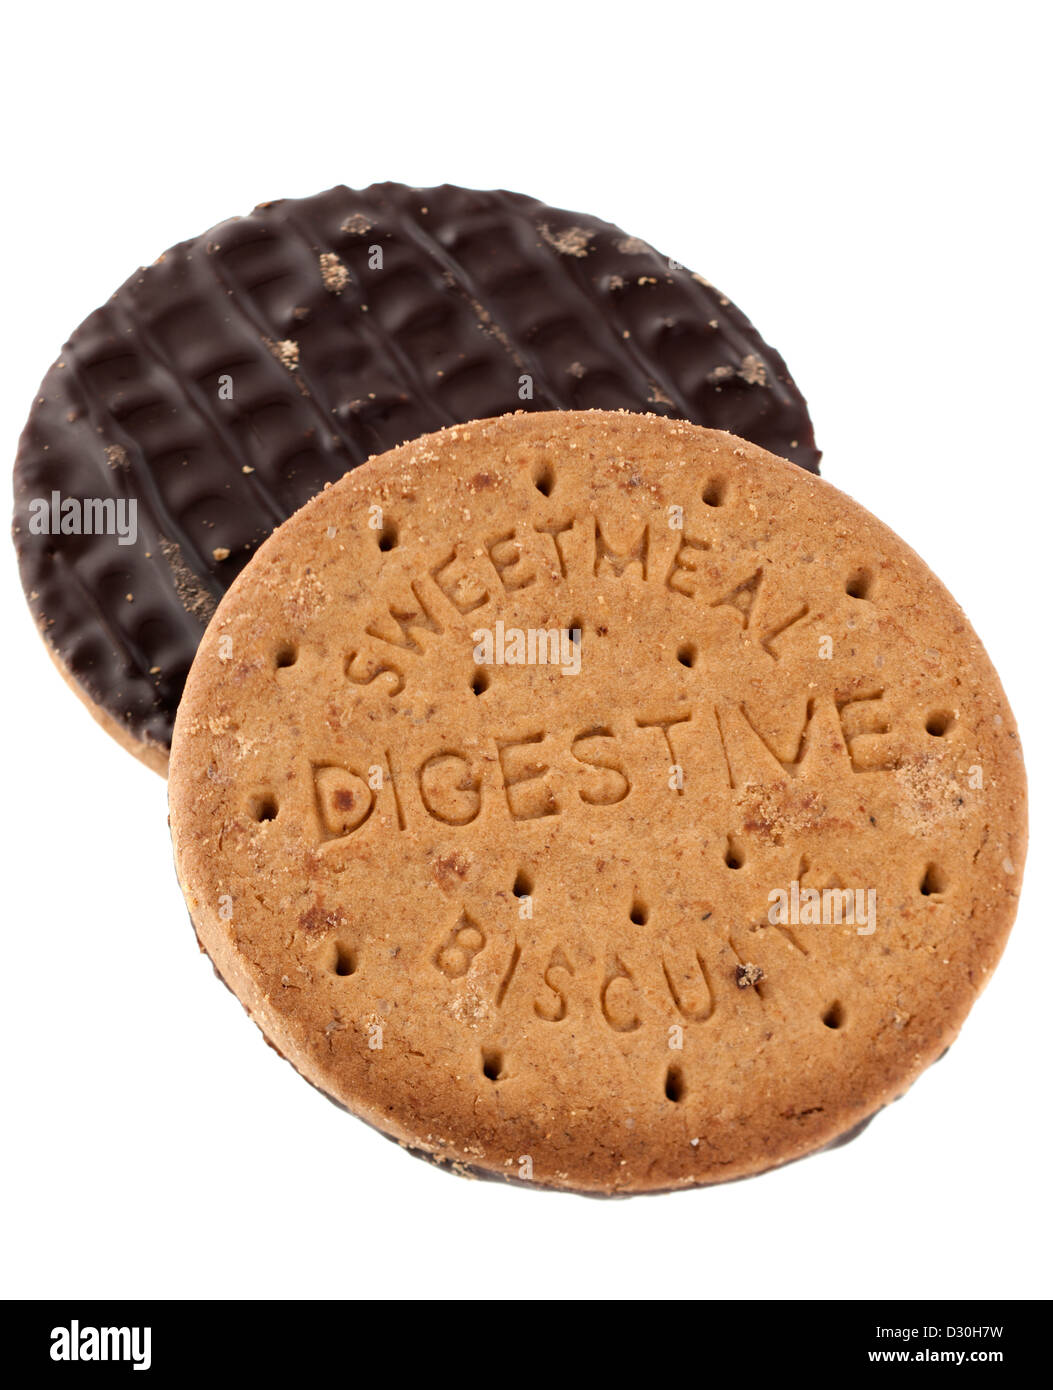 Two sweetmeal digestive biscuits half covered in dark chocolate Stock Photo